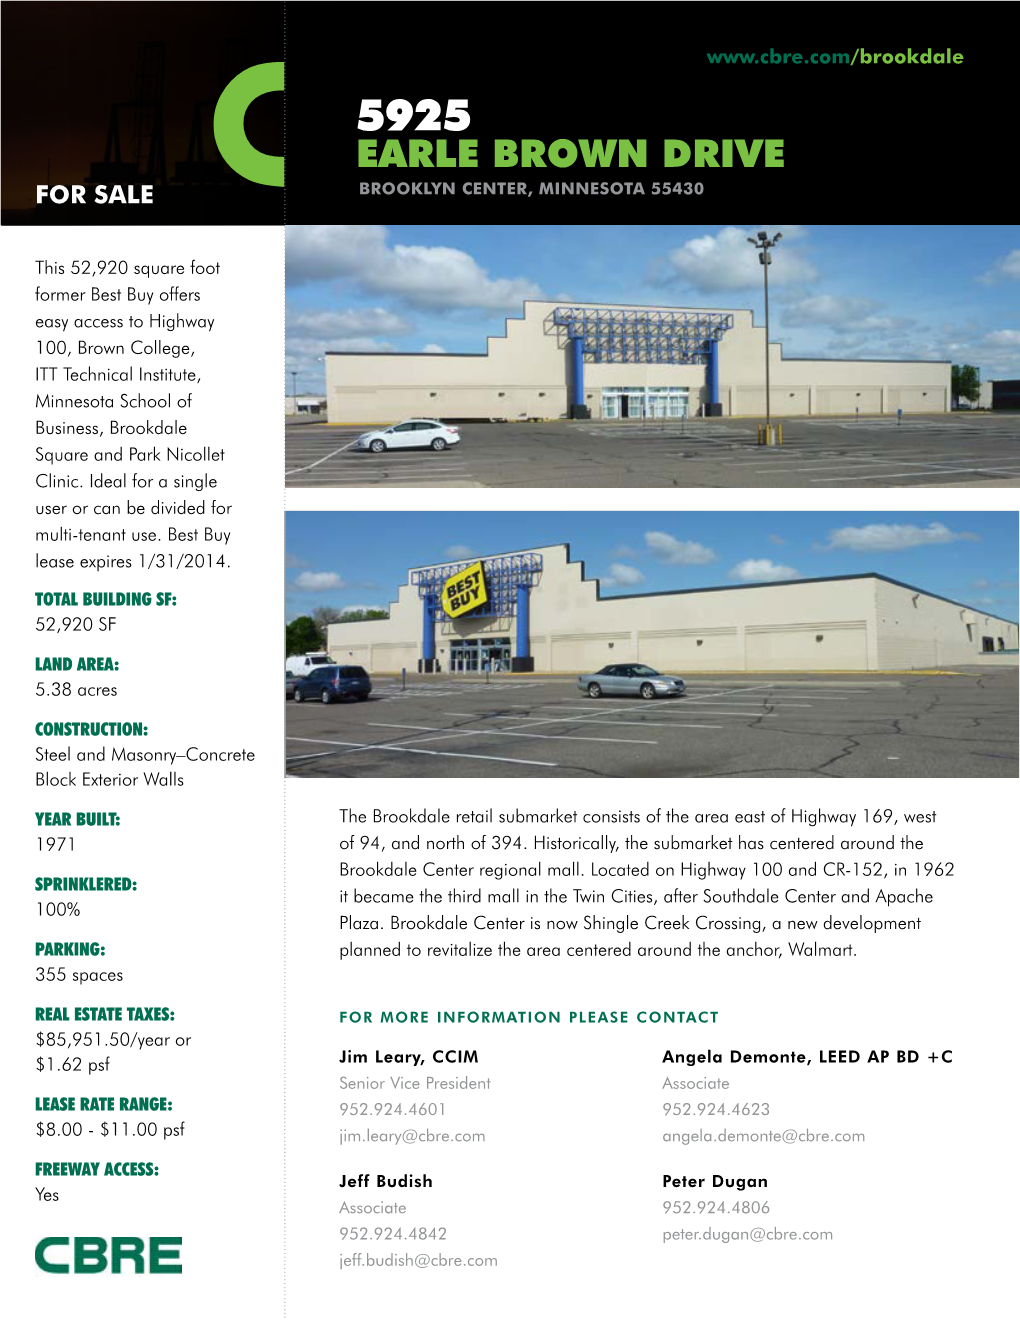 Earle Brown Drive for SALE Brooklyn Center, Minnesota 55430